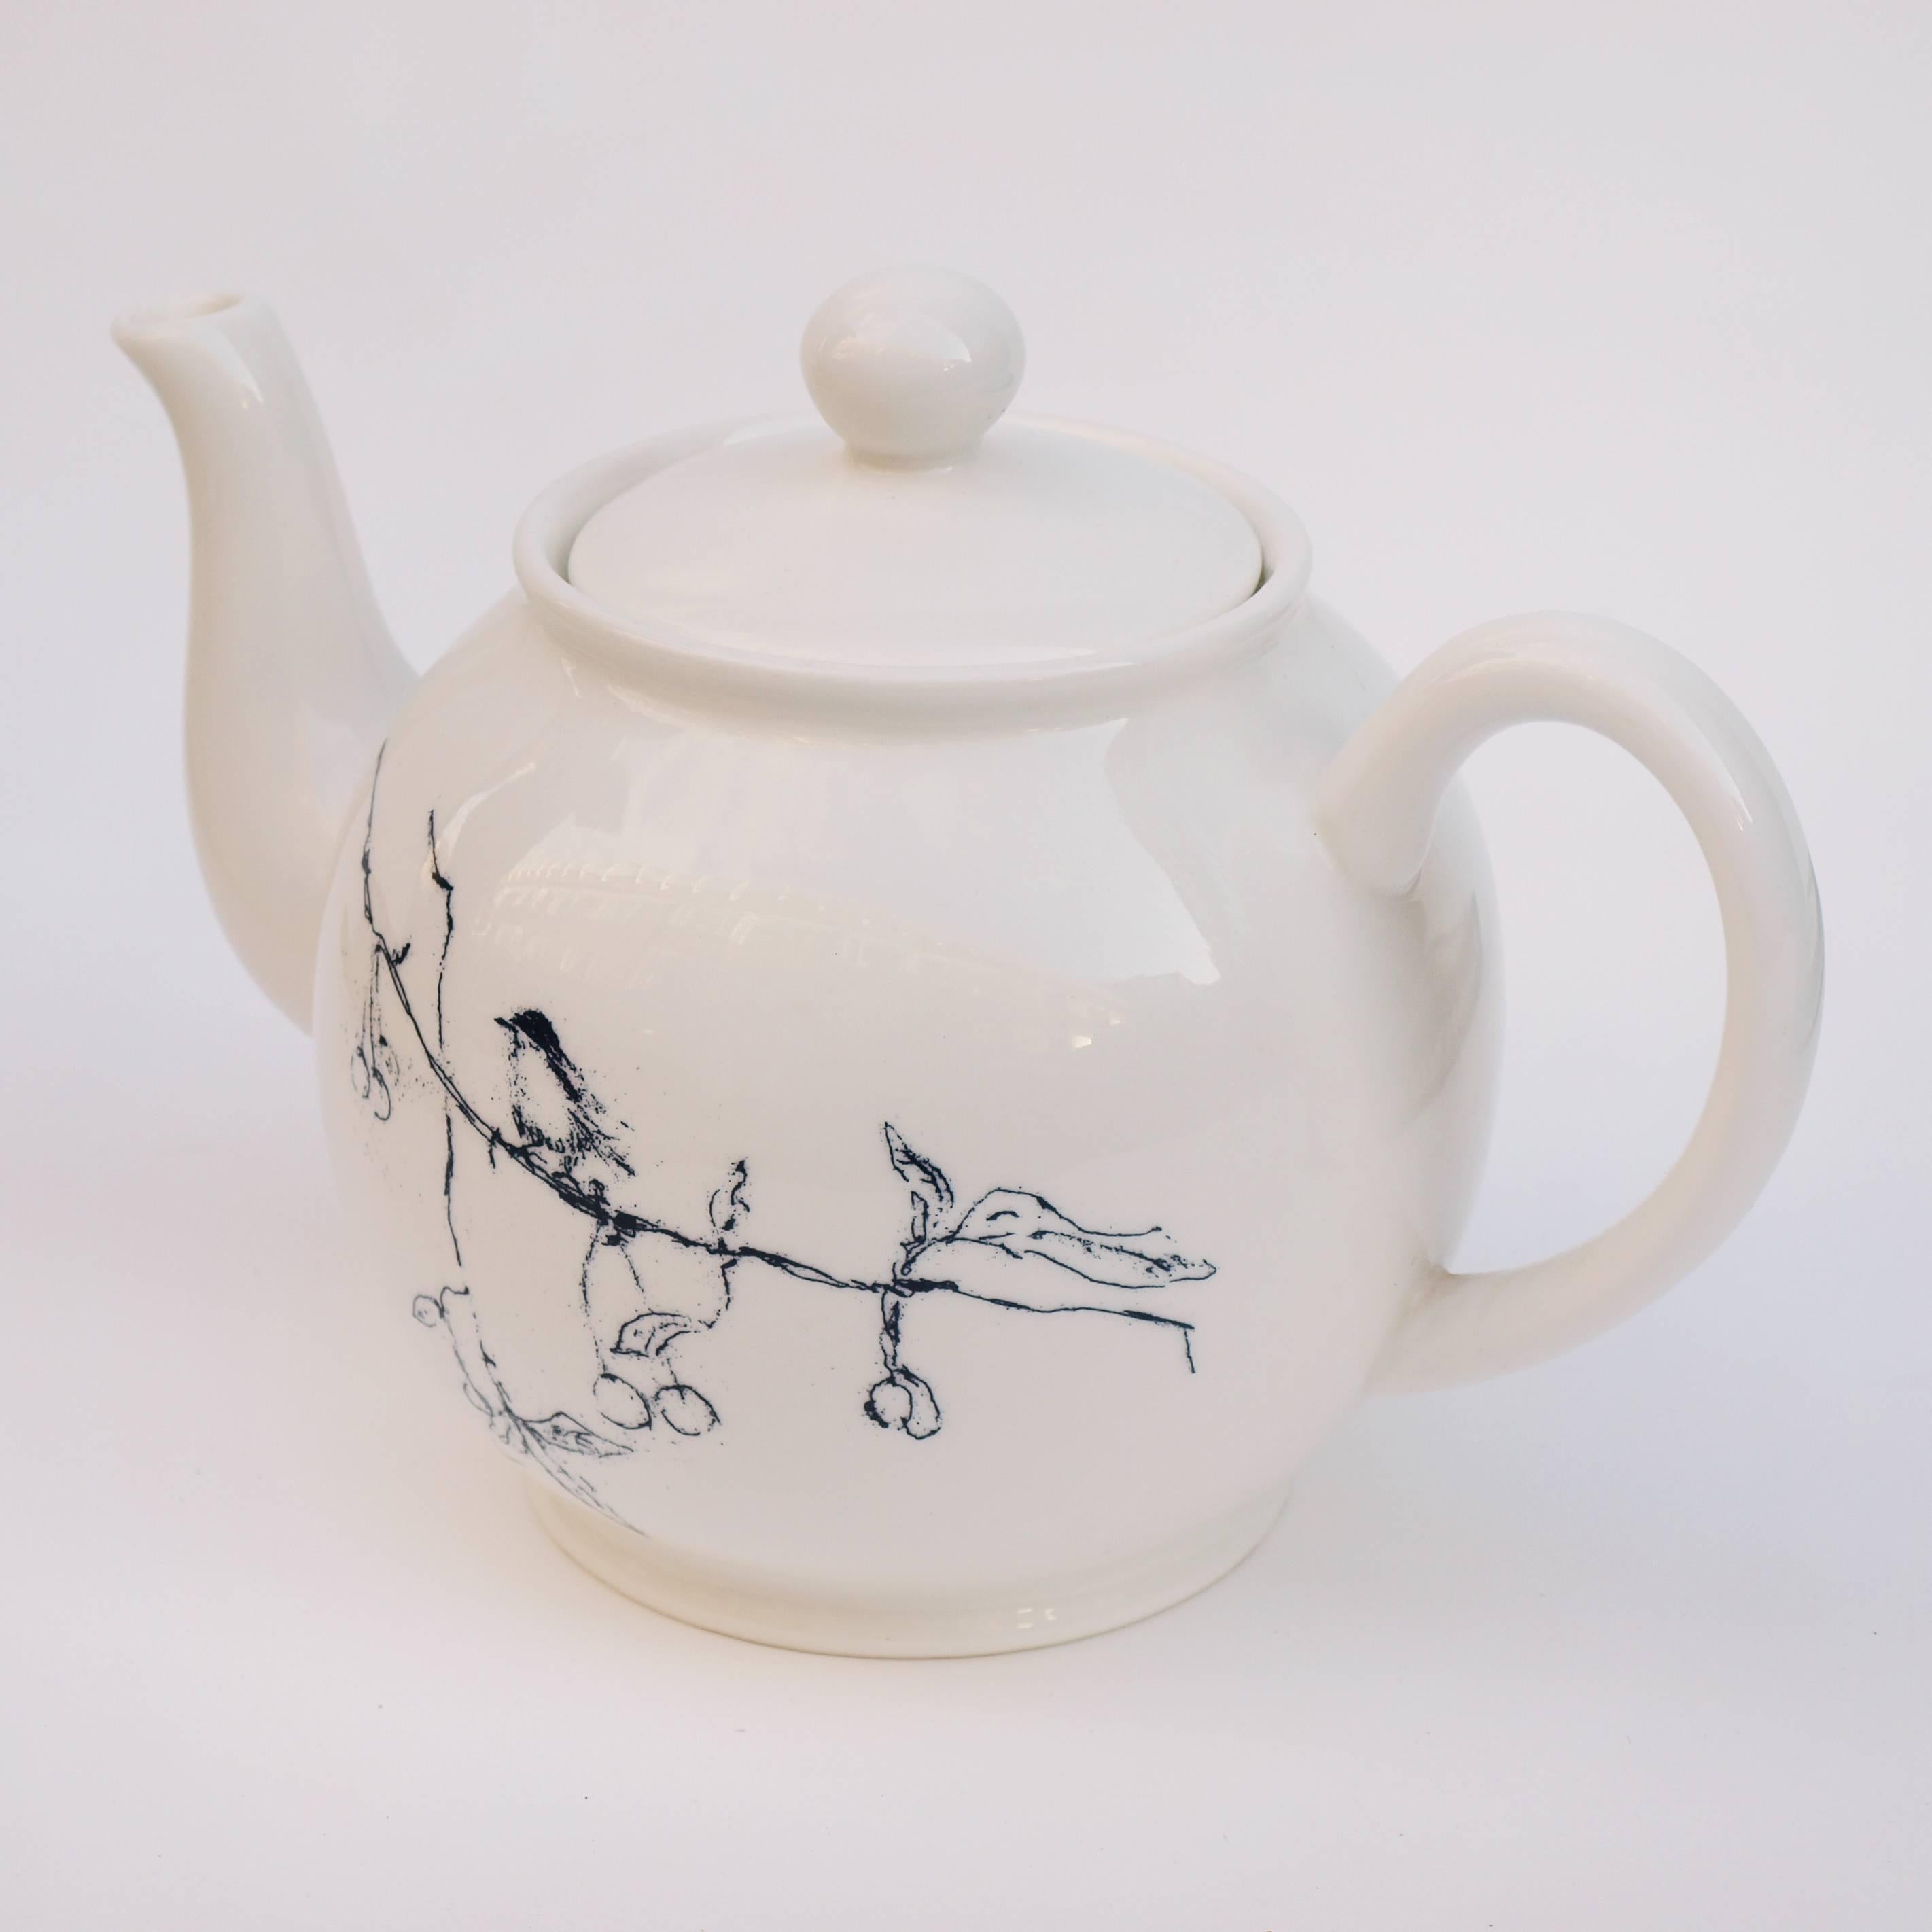 A Tracey Emin limited edition China teapot entitled 'Foundlings and Fledglings - Our Angels of this Earth' produced for Counter Editions and originally released to coincide with the Venice Biennale. Produced in an edition of 1000, this is number